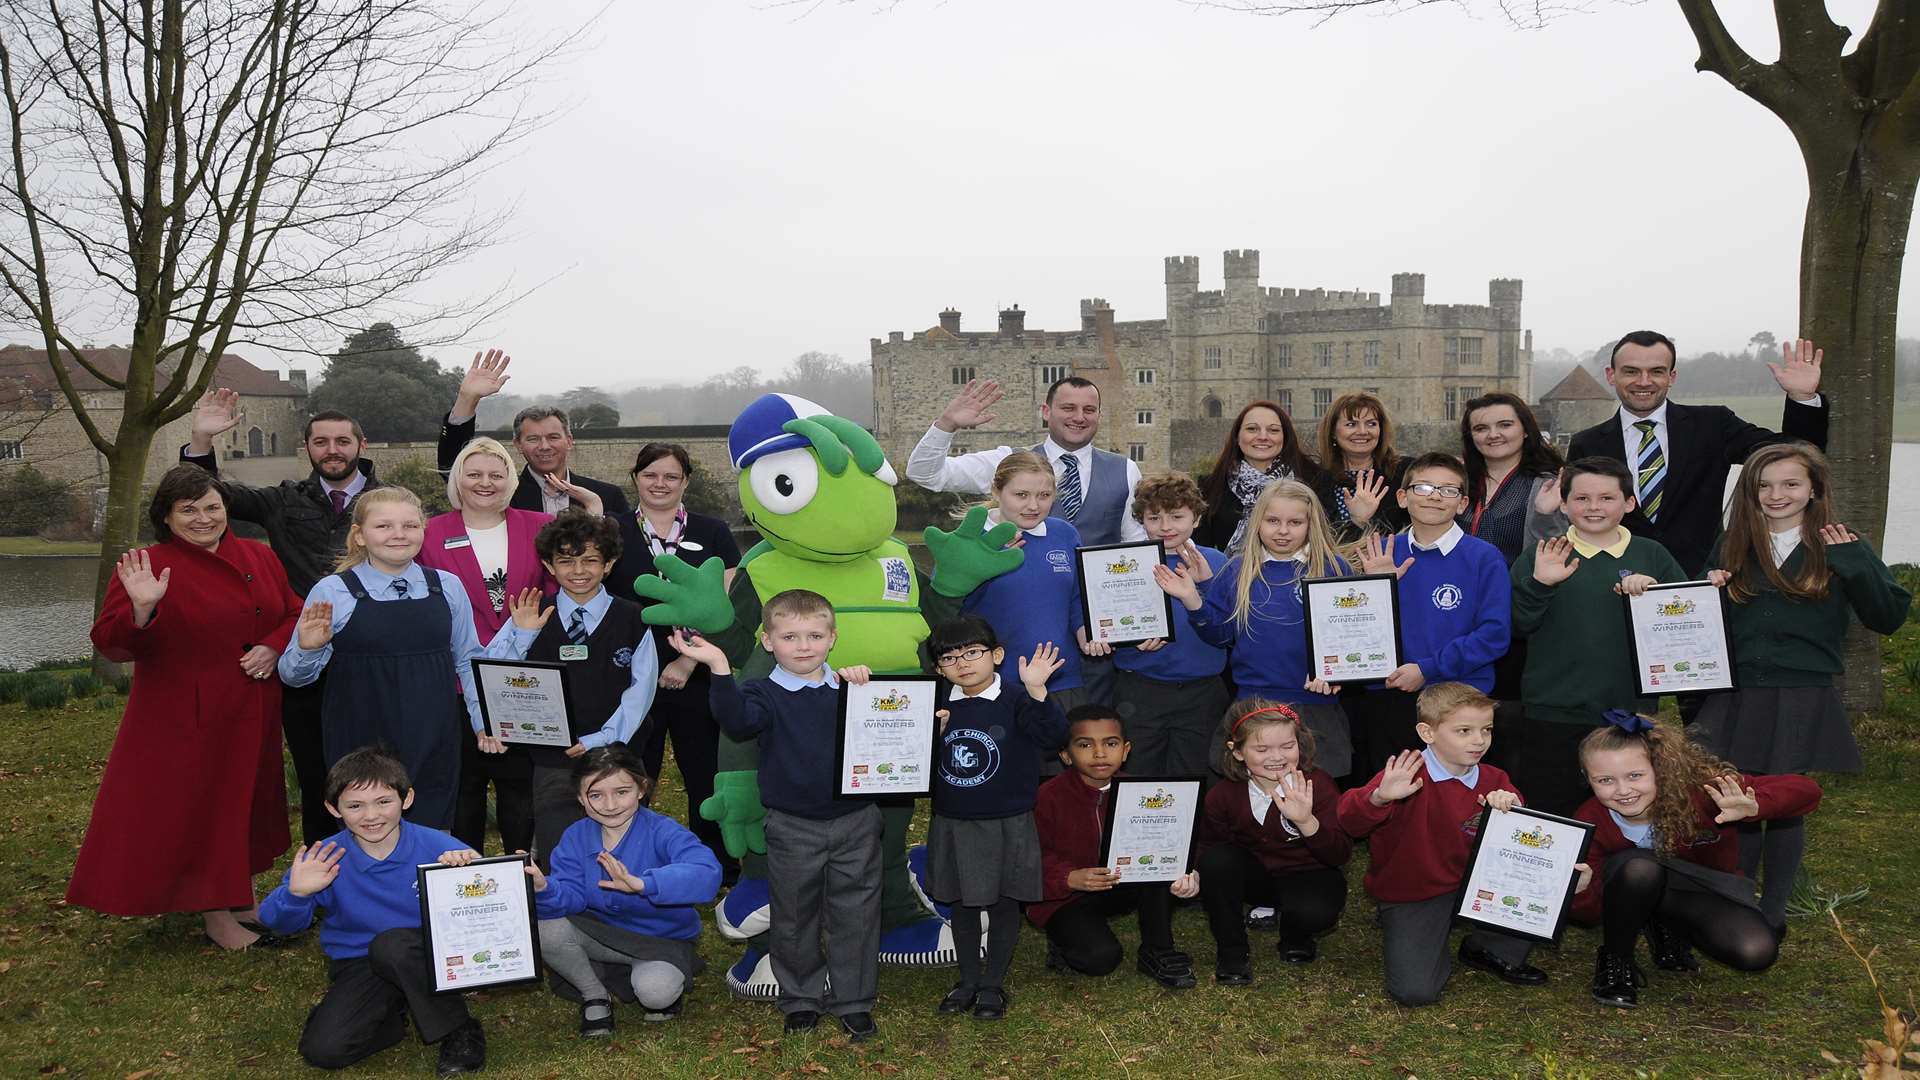 Walk to school district champions celebrate with mascot Buster Bug and key partner organisations from KCC, Medway Council, 3R's, Specsavers, Mini Babybel, Countrystyle, and Golding Vision (part of Golding Homes).